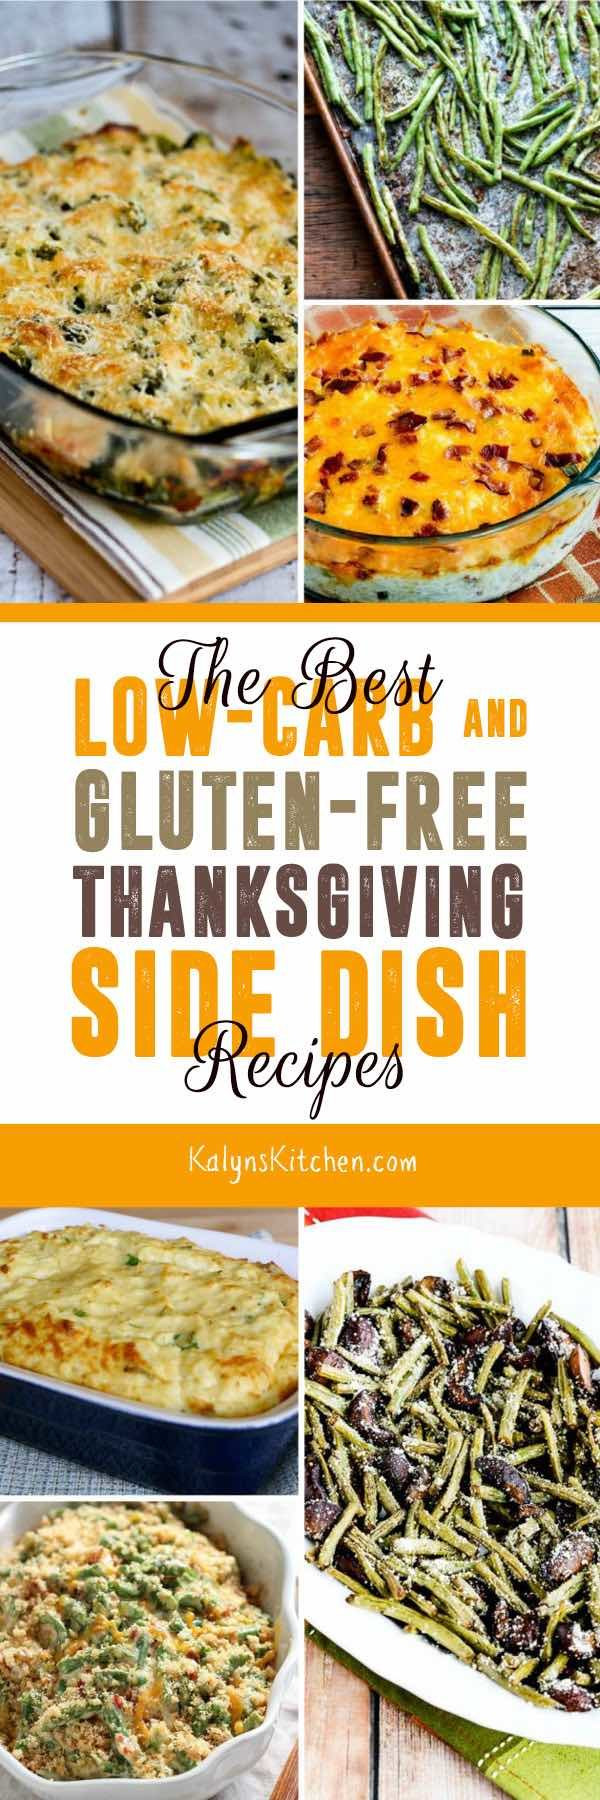 Gluten Free Thanksgiving Sides
 The BEST Low Carb and Gluten Free Thanksgiving Side Dish